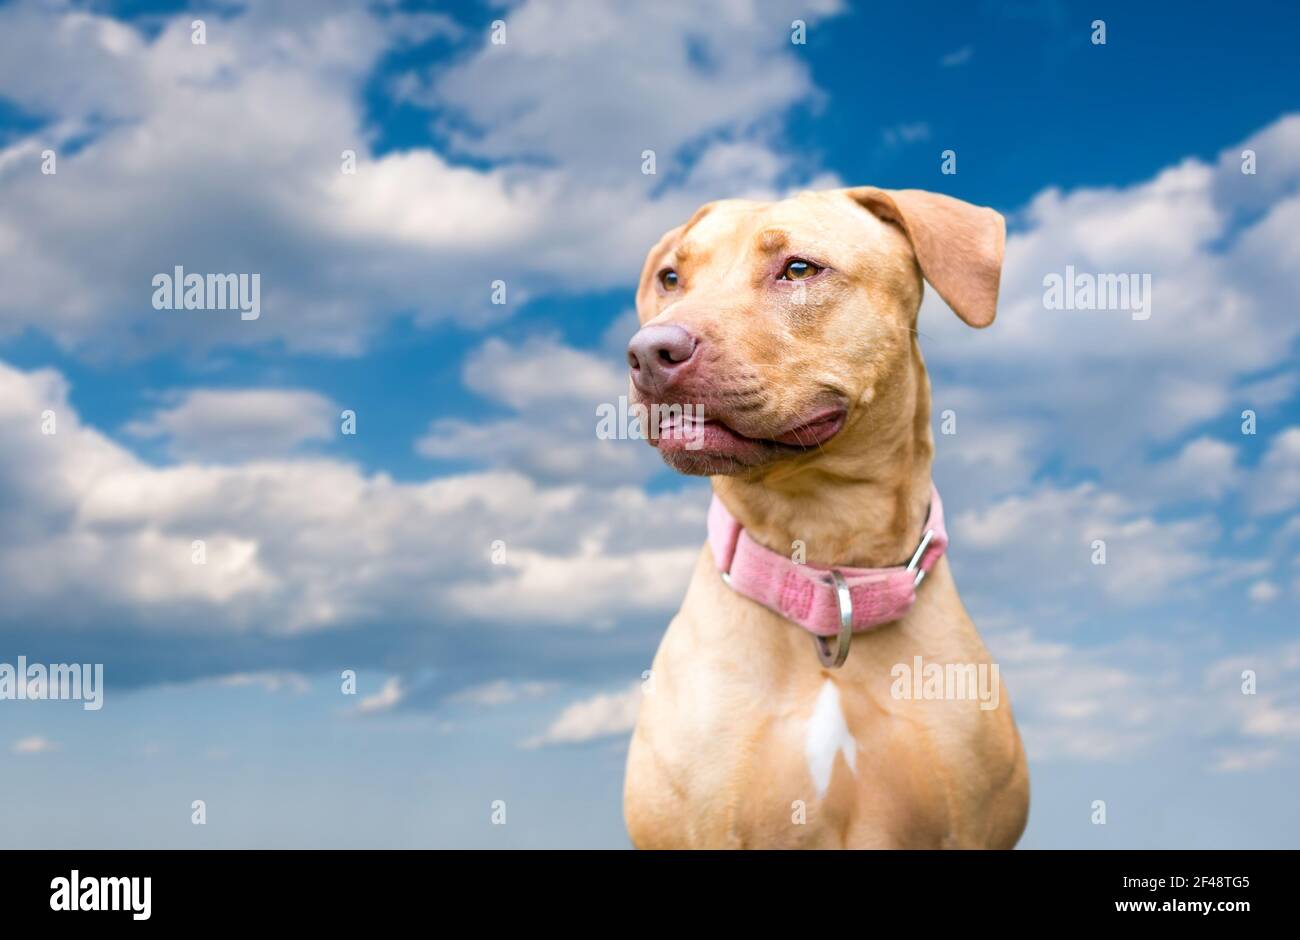 A red Hound x Retriever mixed breed dog outdoors against a blue sky with clouds Stock Photo